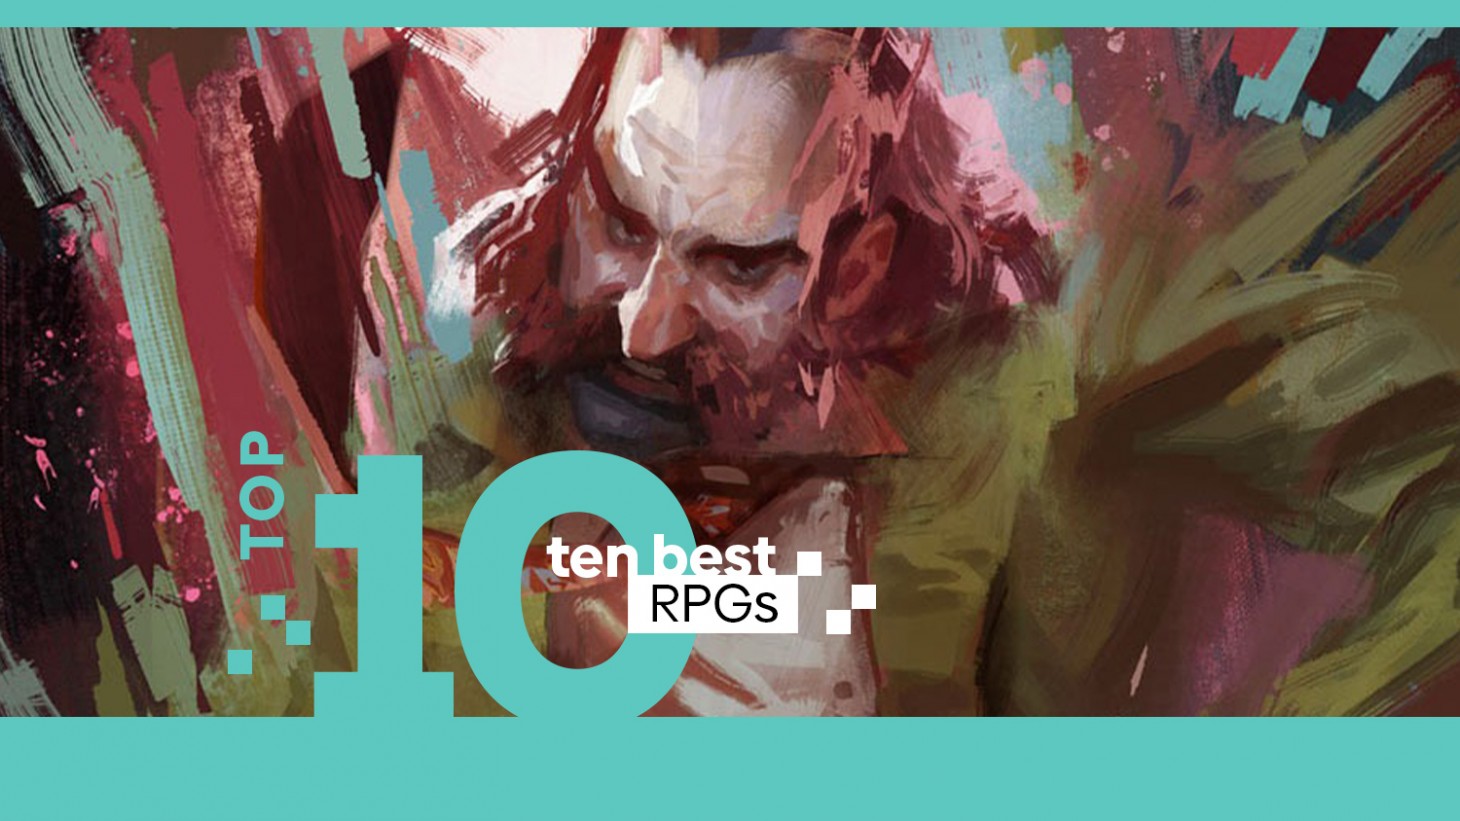 The Top 15 Best RPGs on PC: Final Fantasy, Fallout, and More